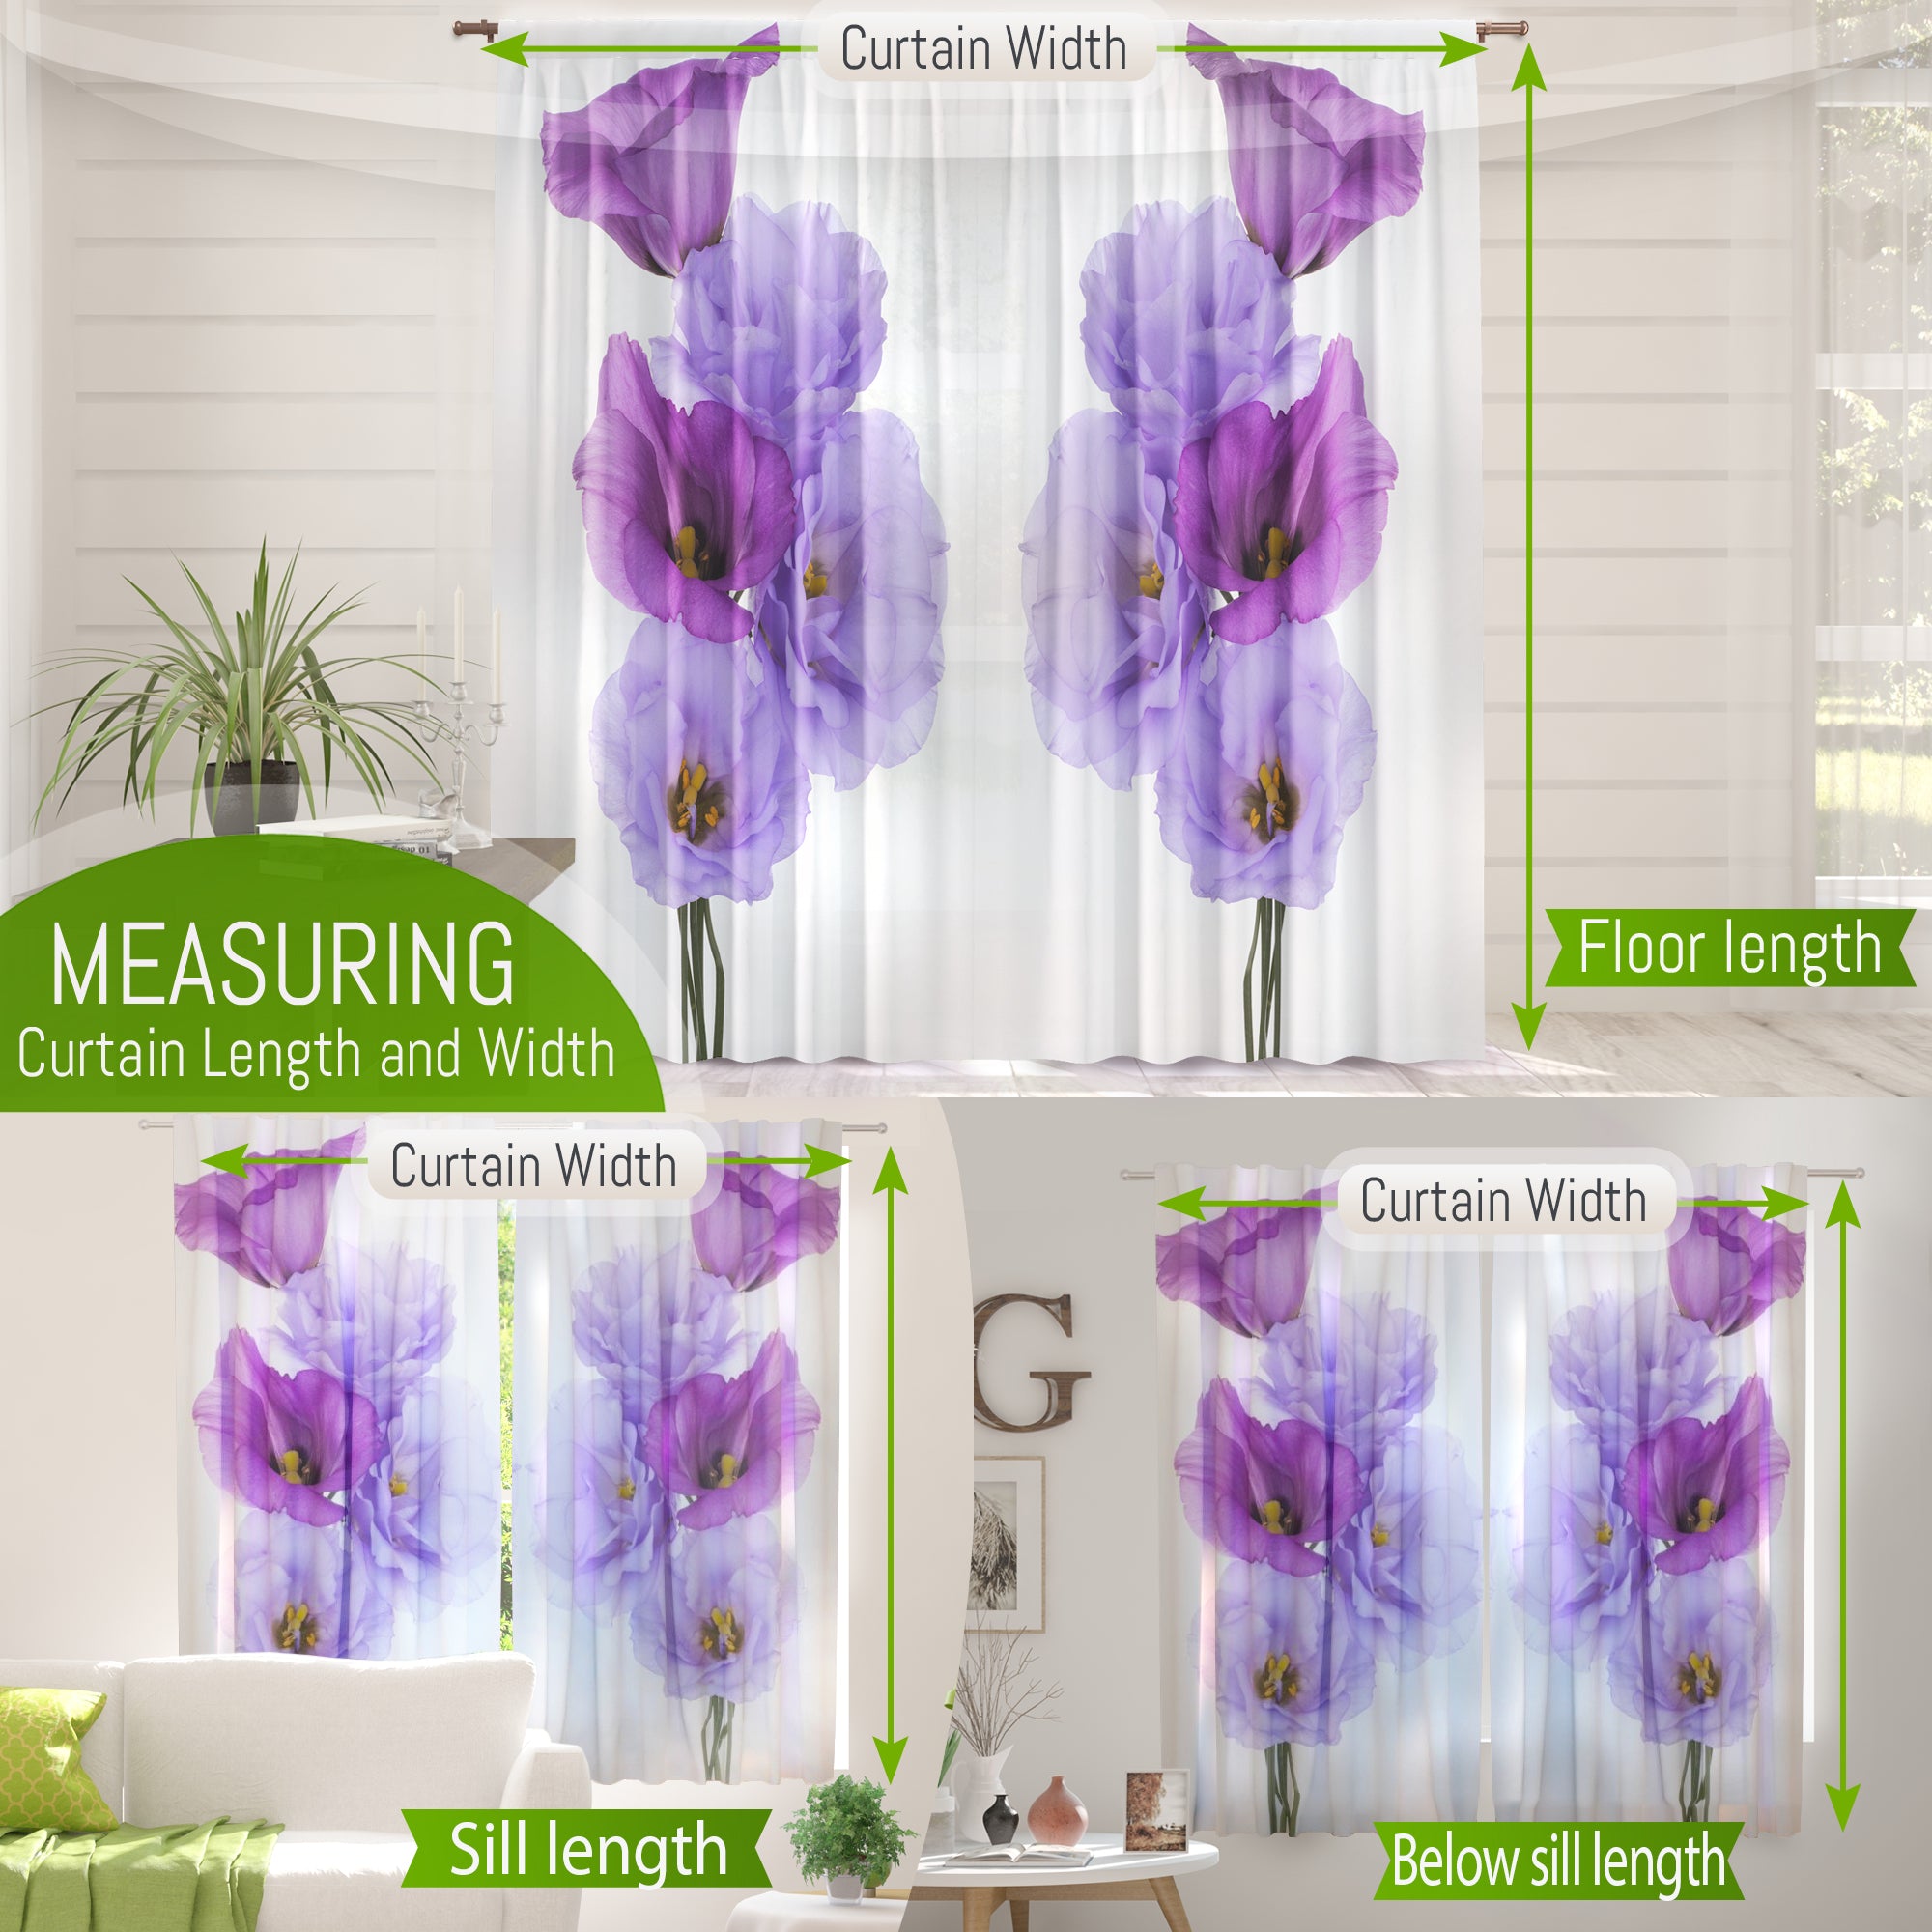 Photo Curtain Abstract Floral Watercolor Painting